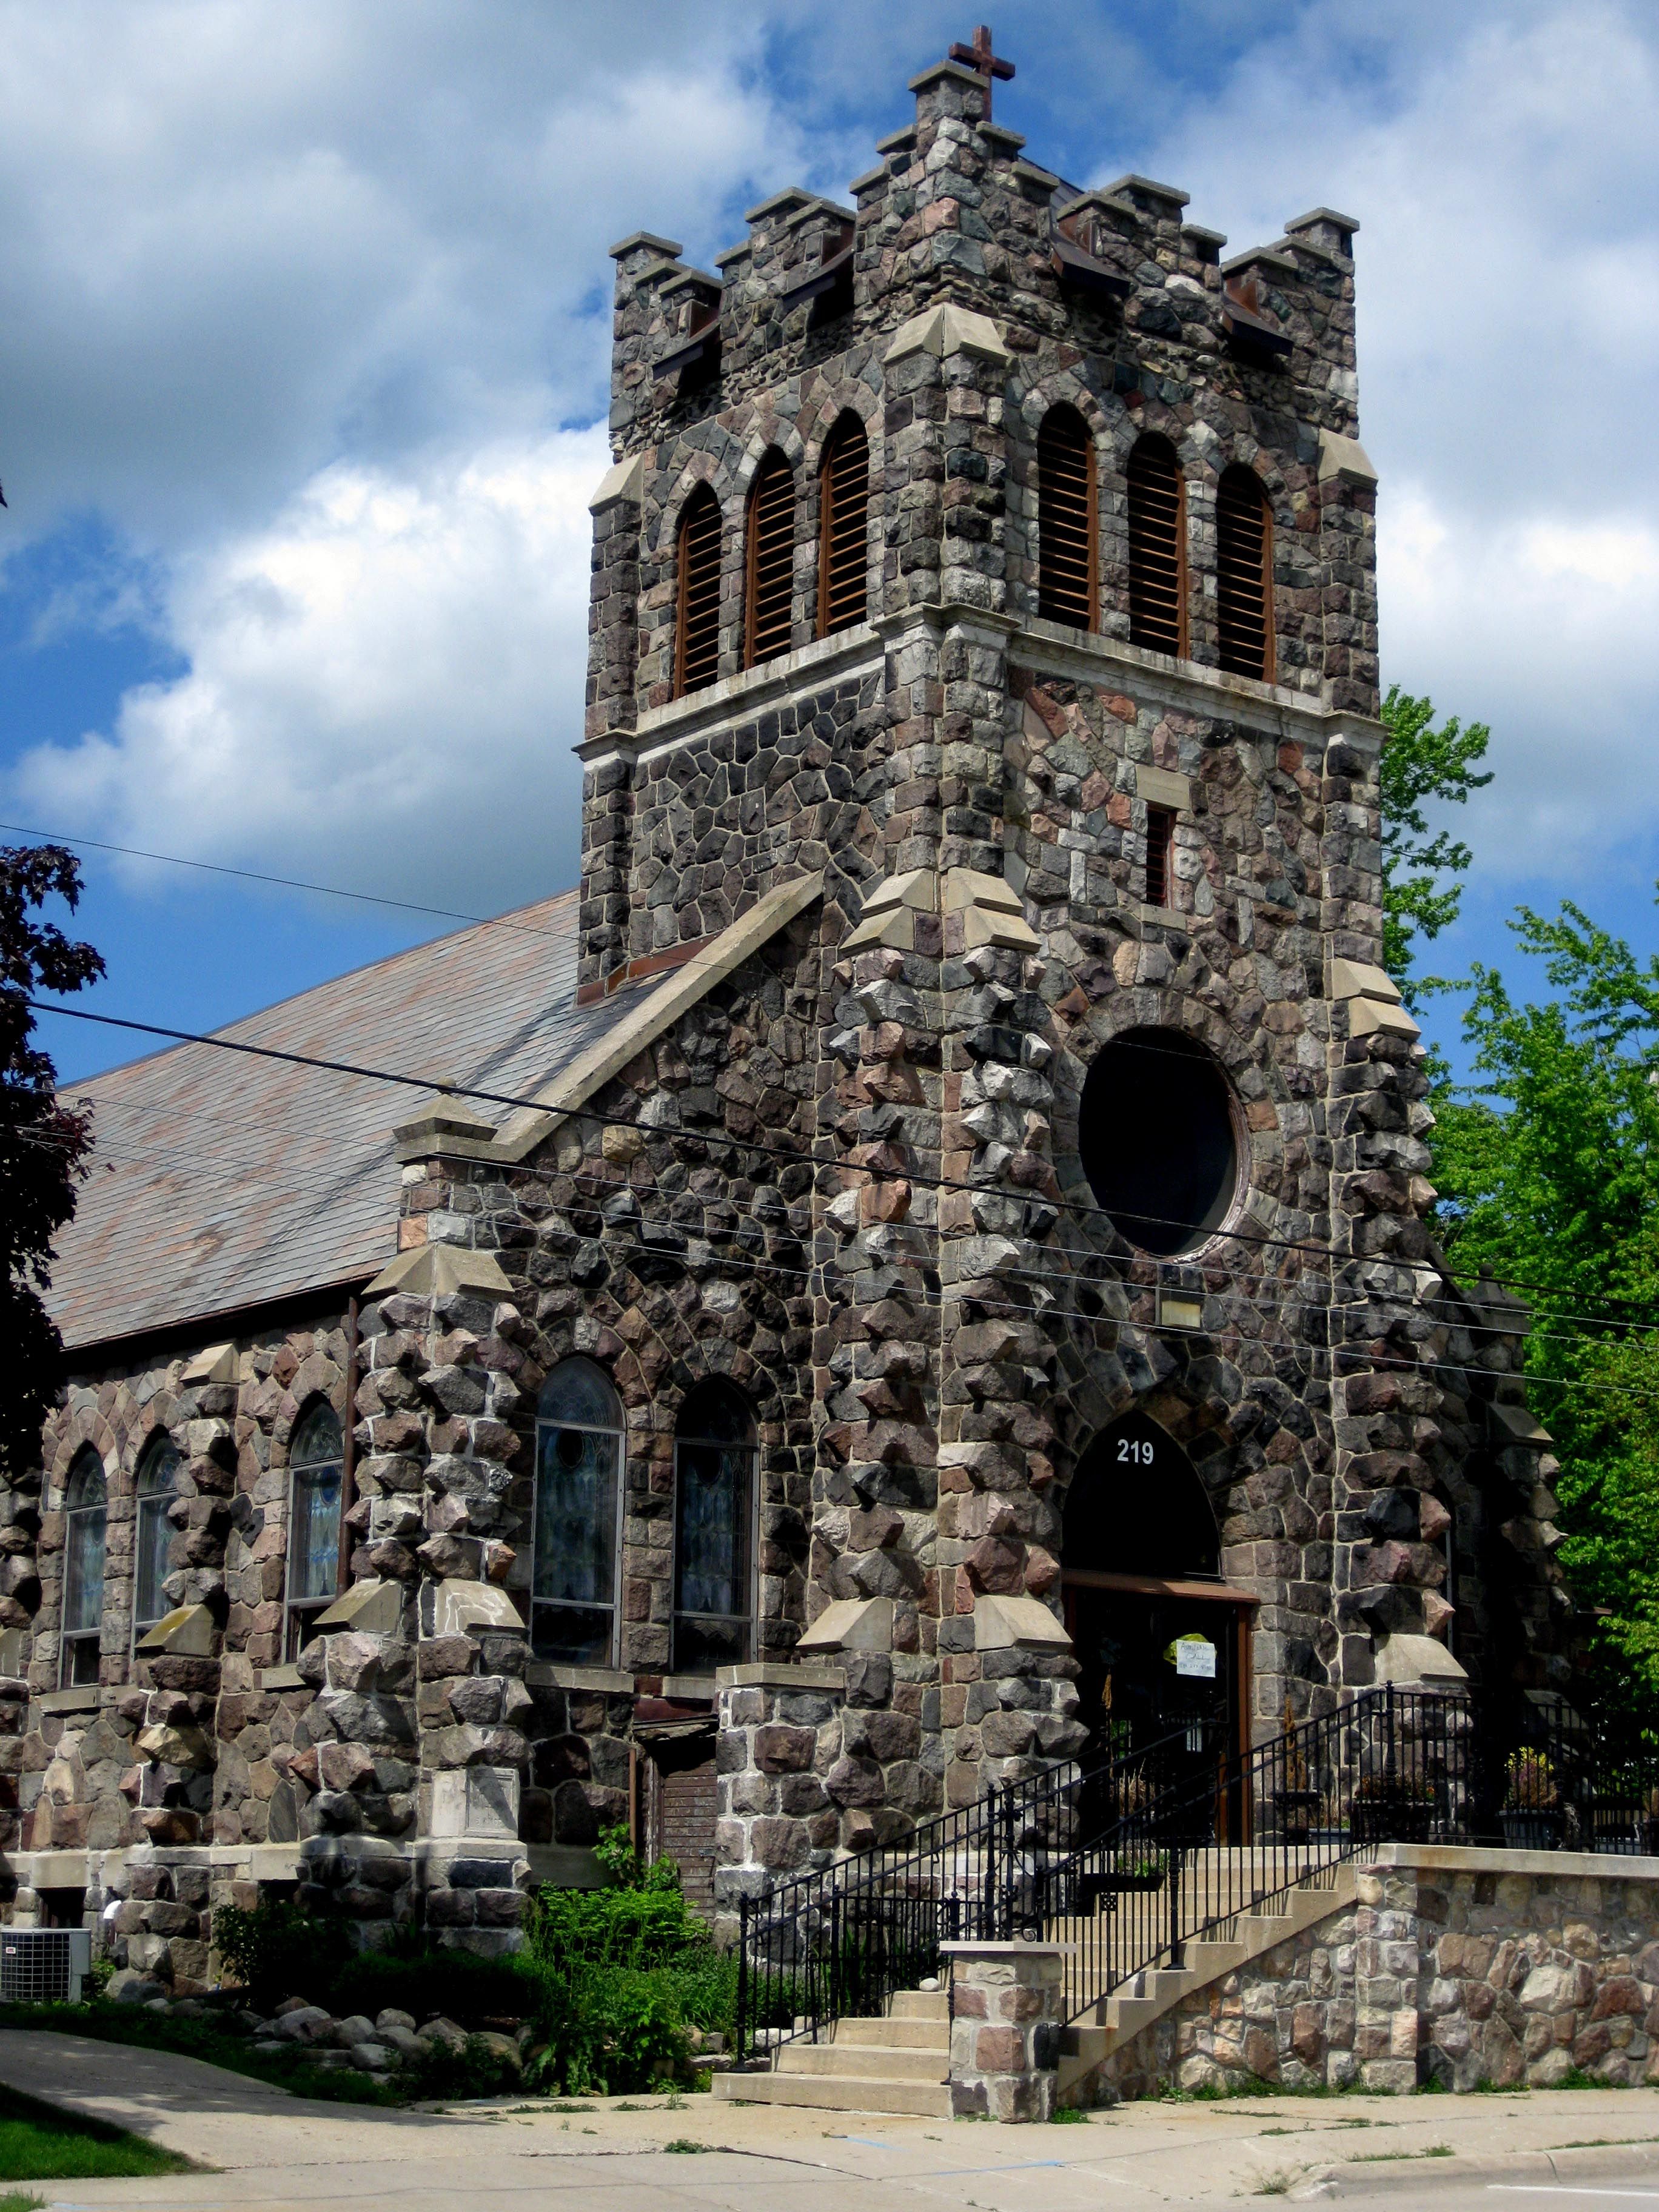 The old stone church on Commerce - a beautiful landmark in this ...